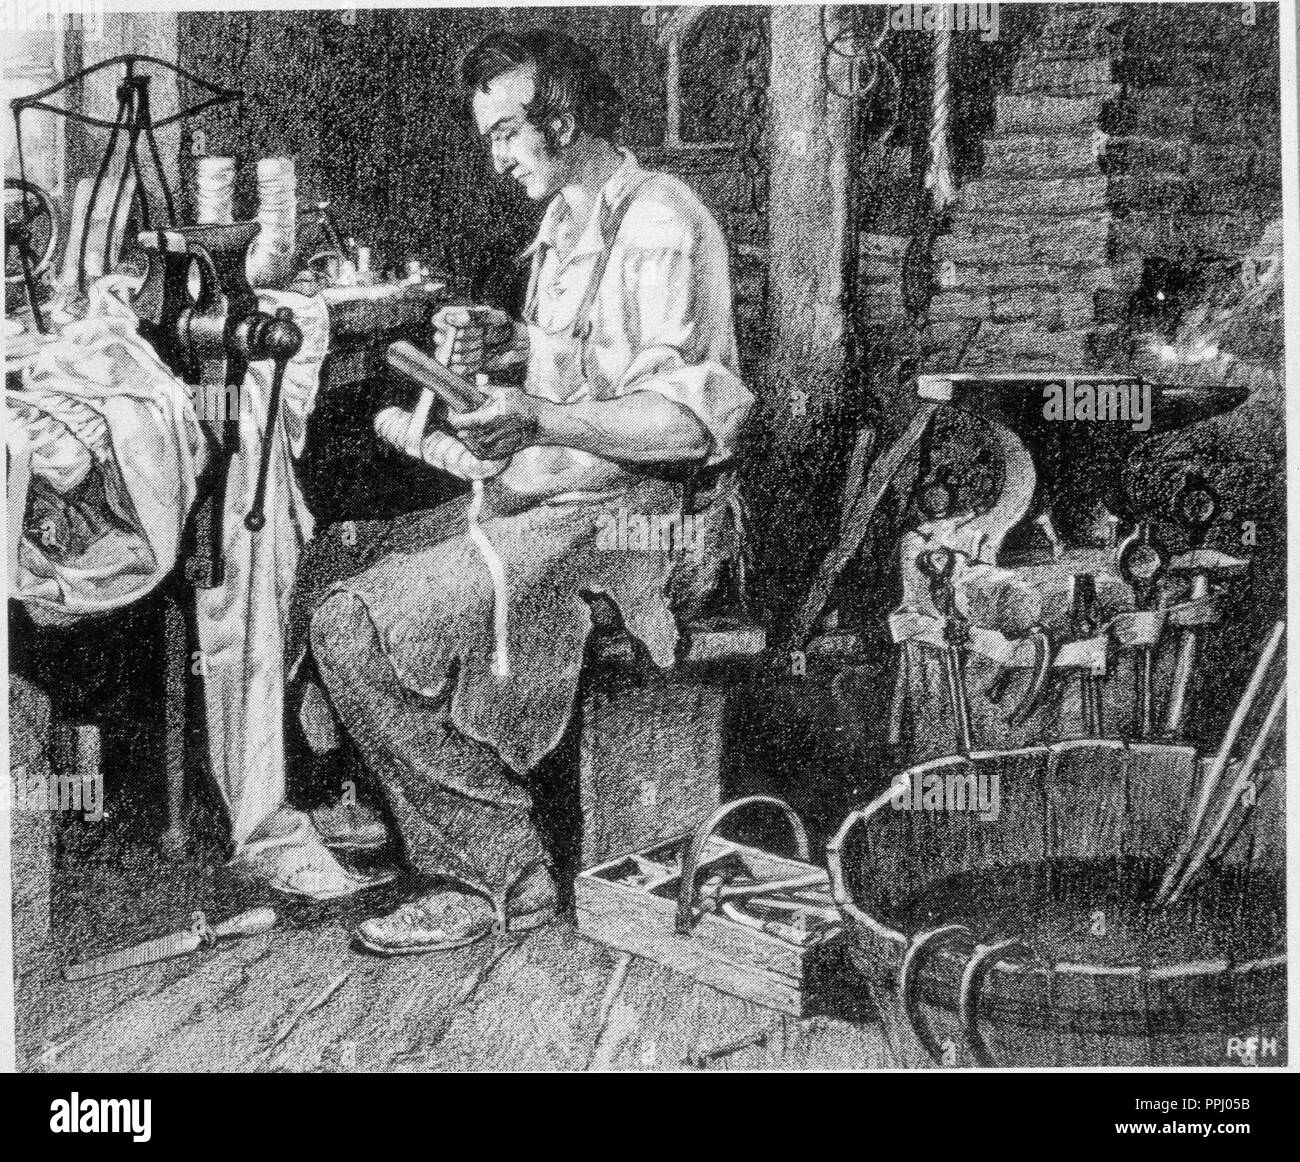 THOMAS DAVENPORT BUILDS THE FIRST ELECTRIC MOTOR - ENGRAVING. 19th CENTURY. Stock Photo